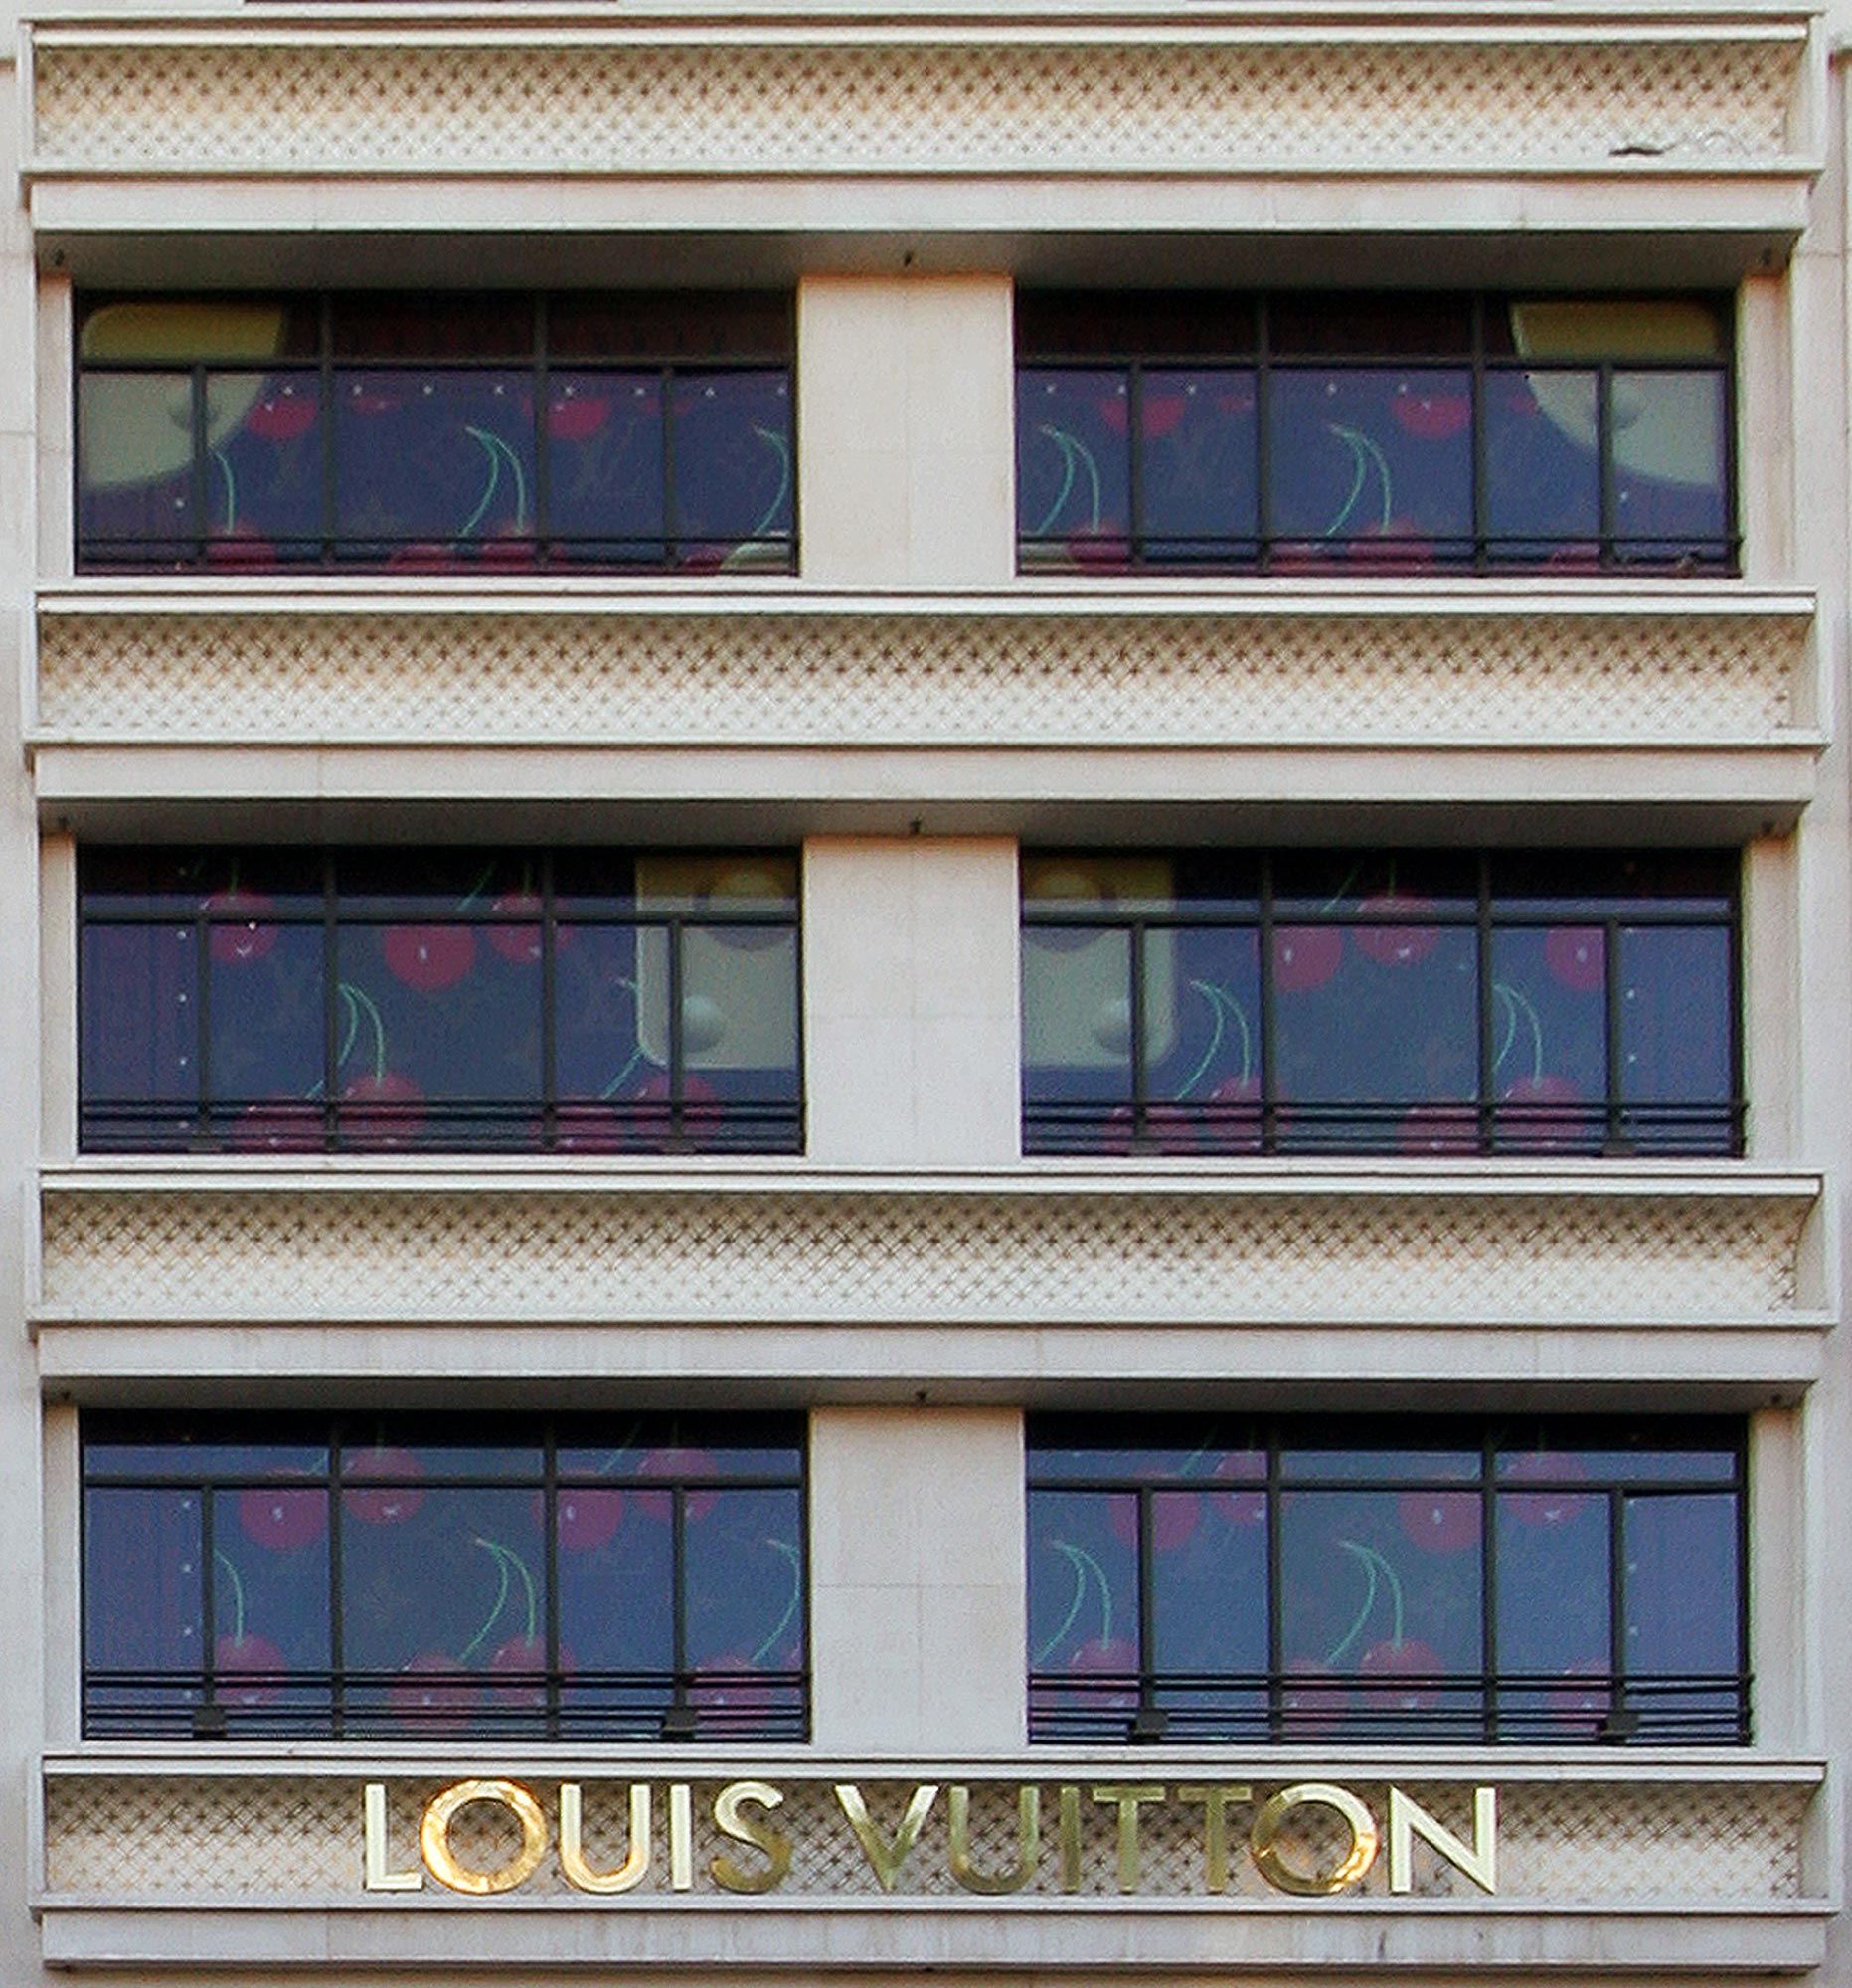 File:Lighted polyhedral building Louis Vuitton in Singapore.jpg